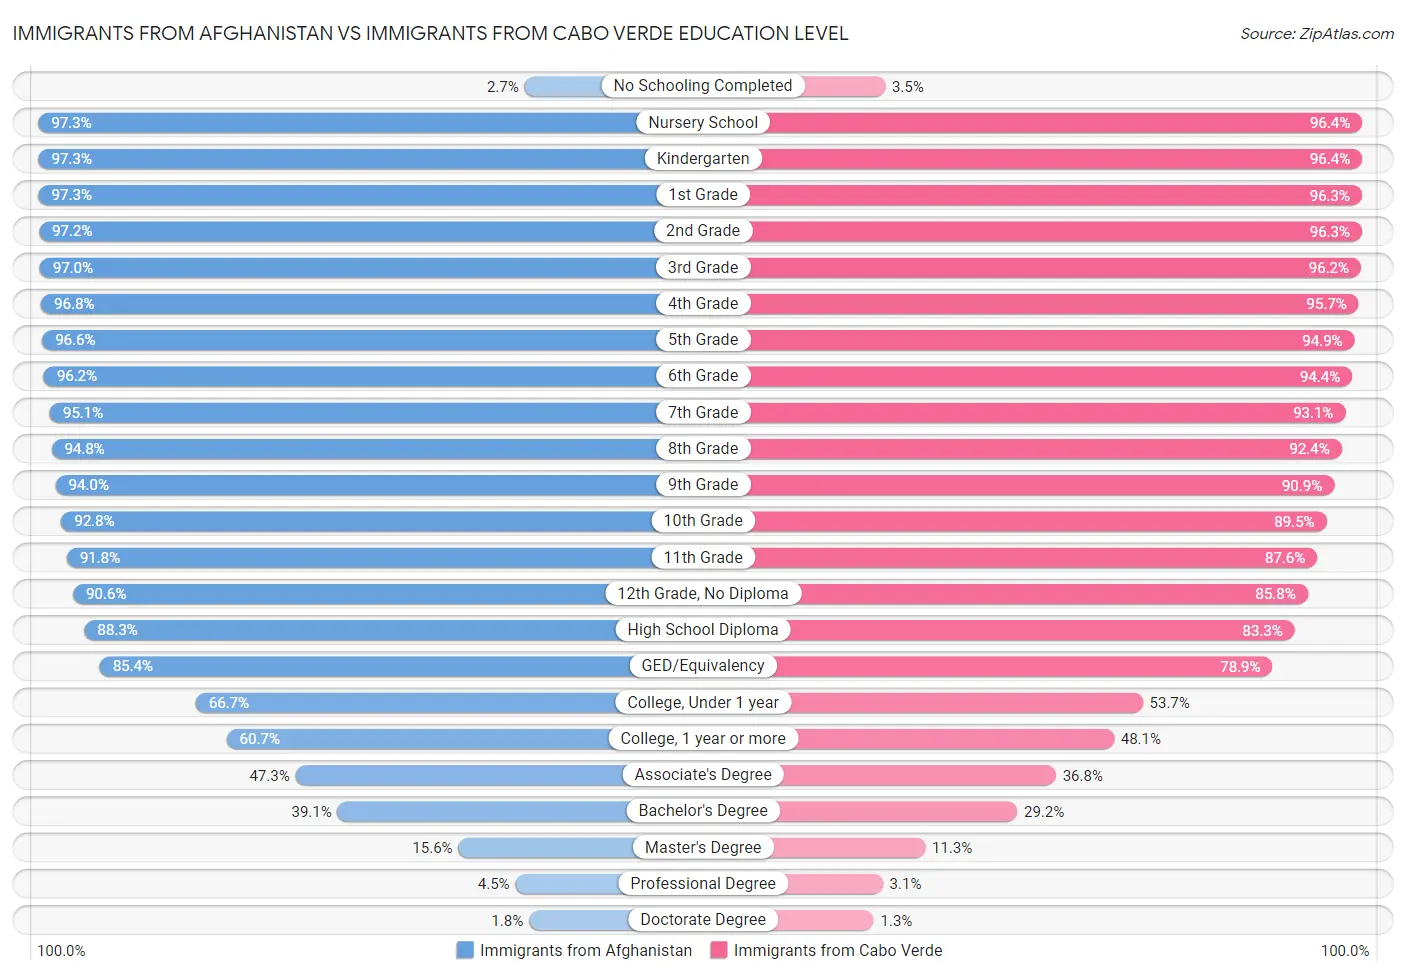 Immigrants from Afghanistan vs Immigrants from Cabo Verde Education Level